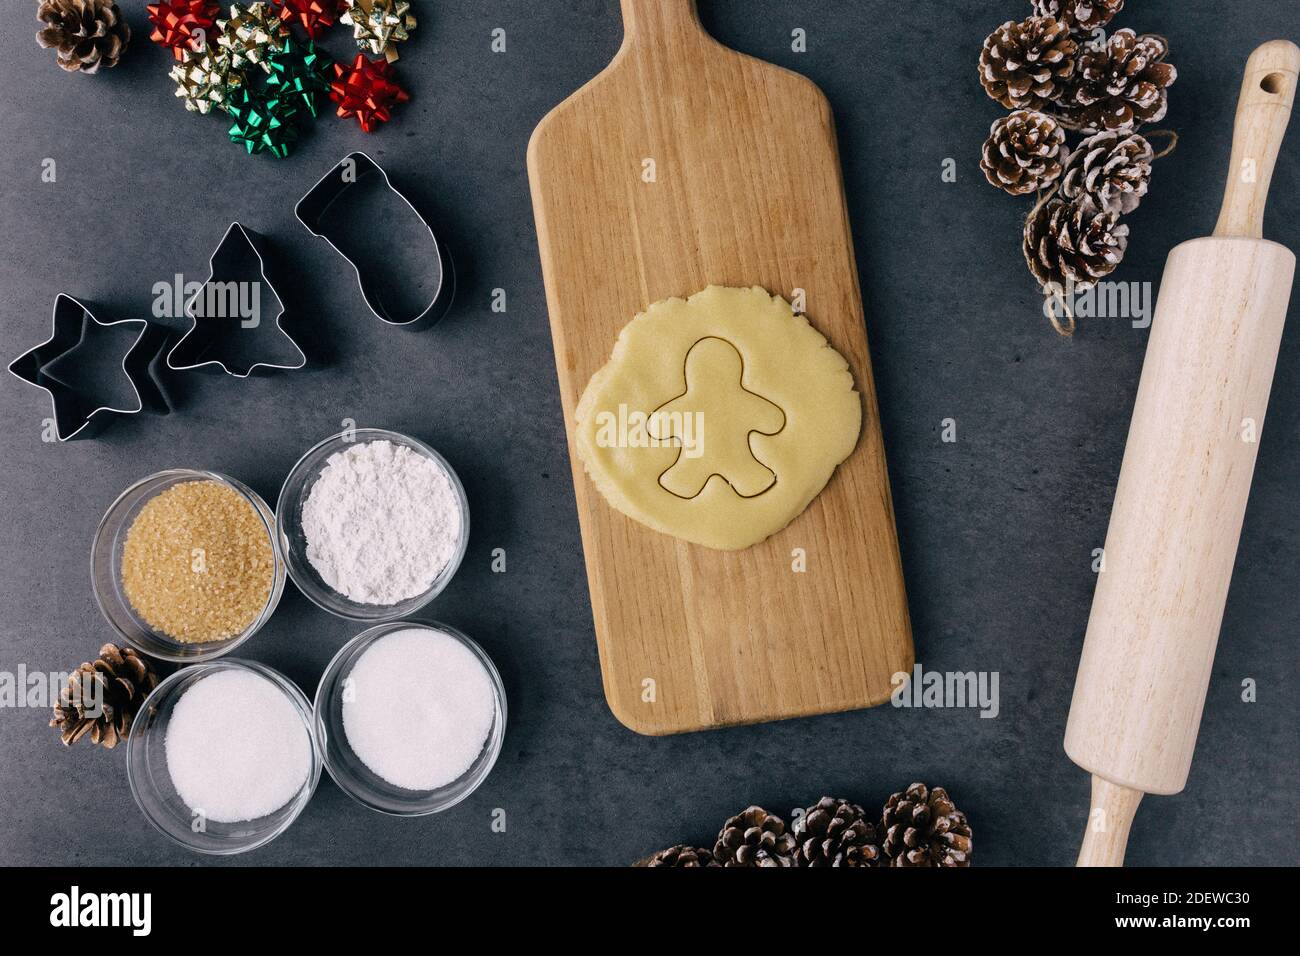 Cutting Christmas Ginger Bread Man Cookie In Raw Cookie Dough With Pine Cones, Holiday Ribbons, And Ingredients on Dark Slate Texture Stock Photo